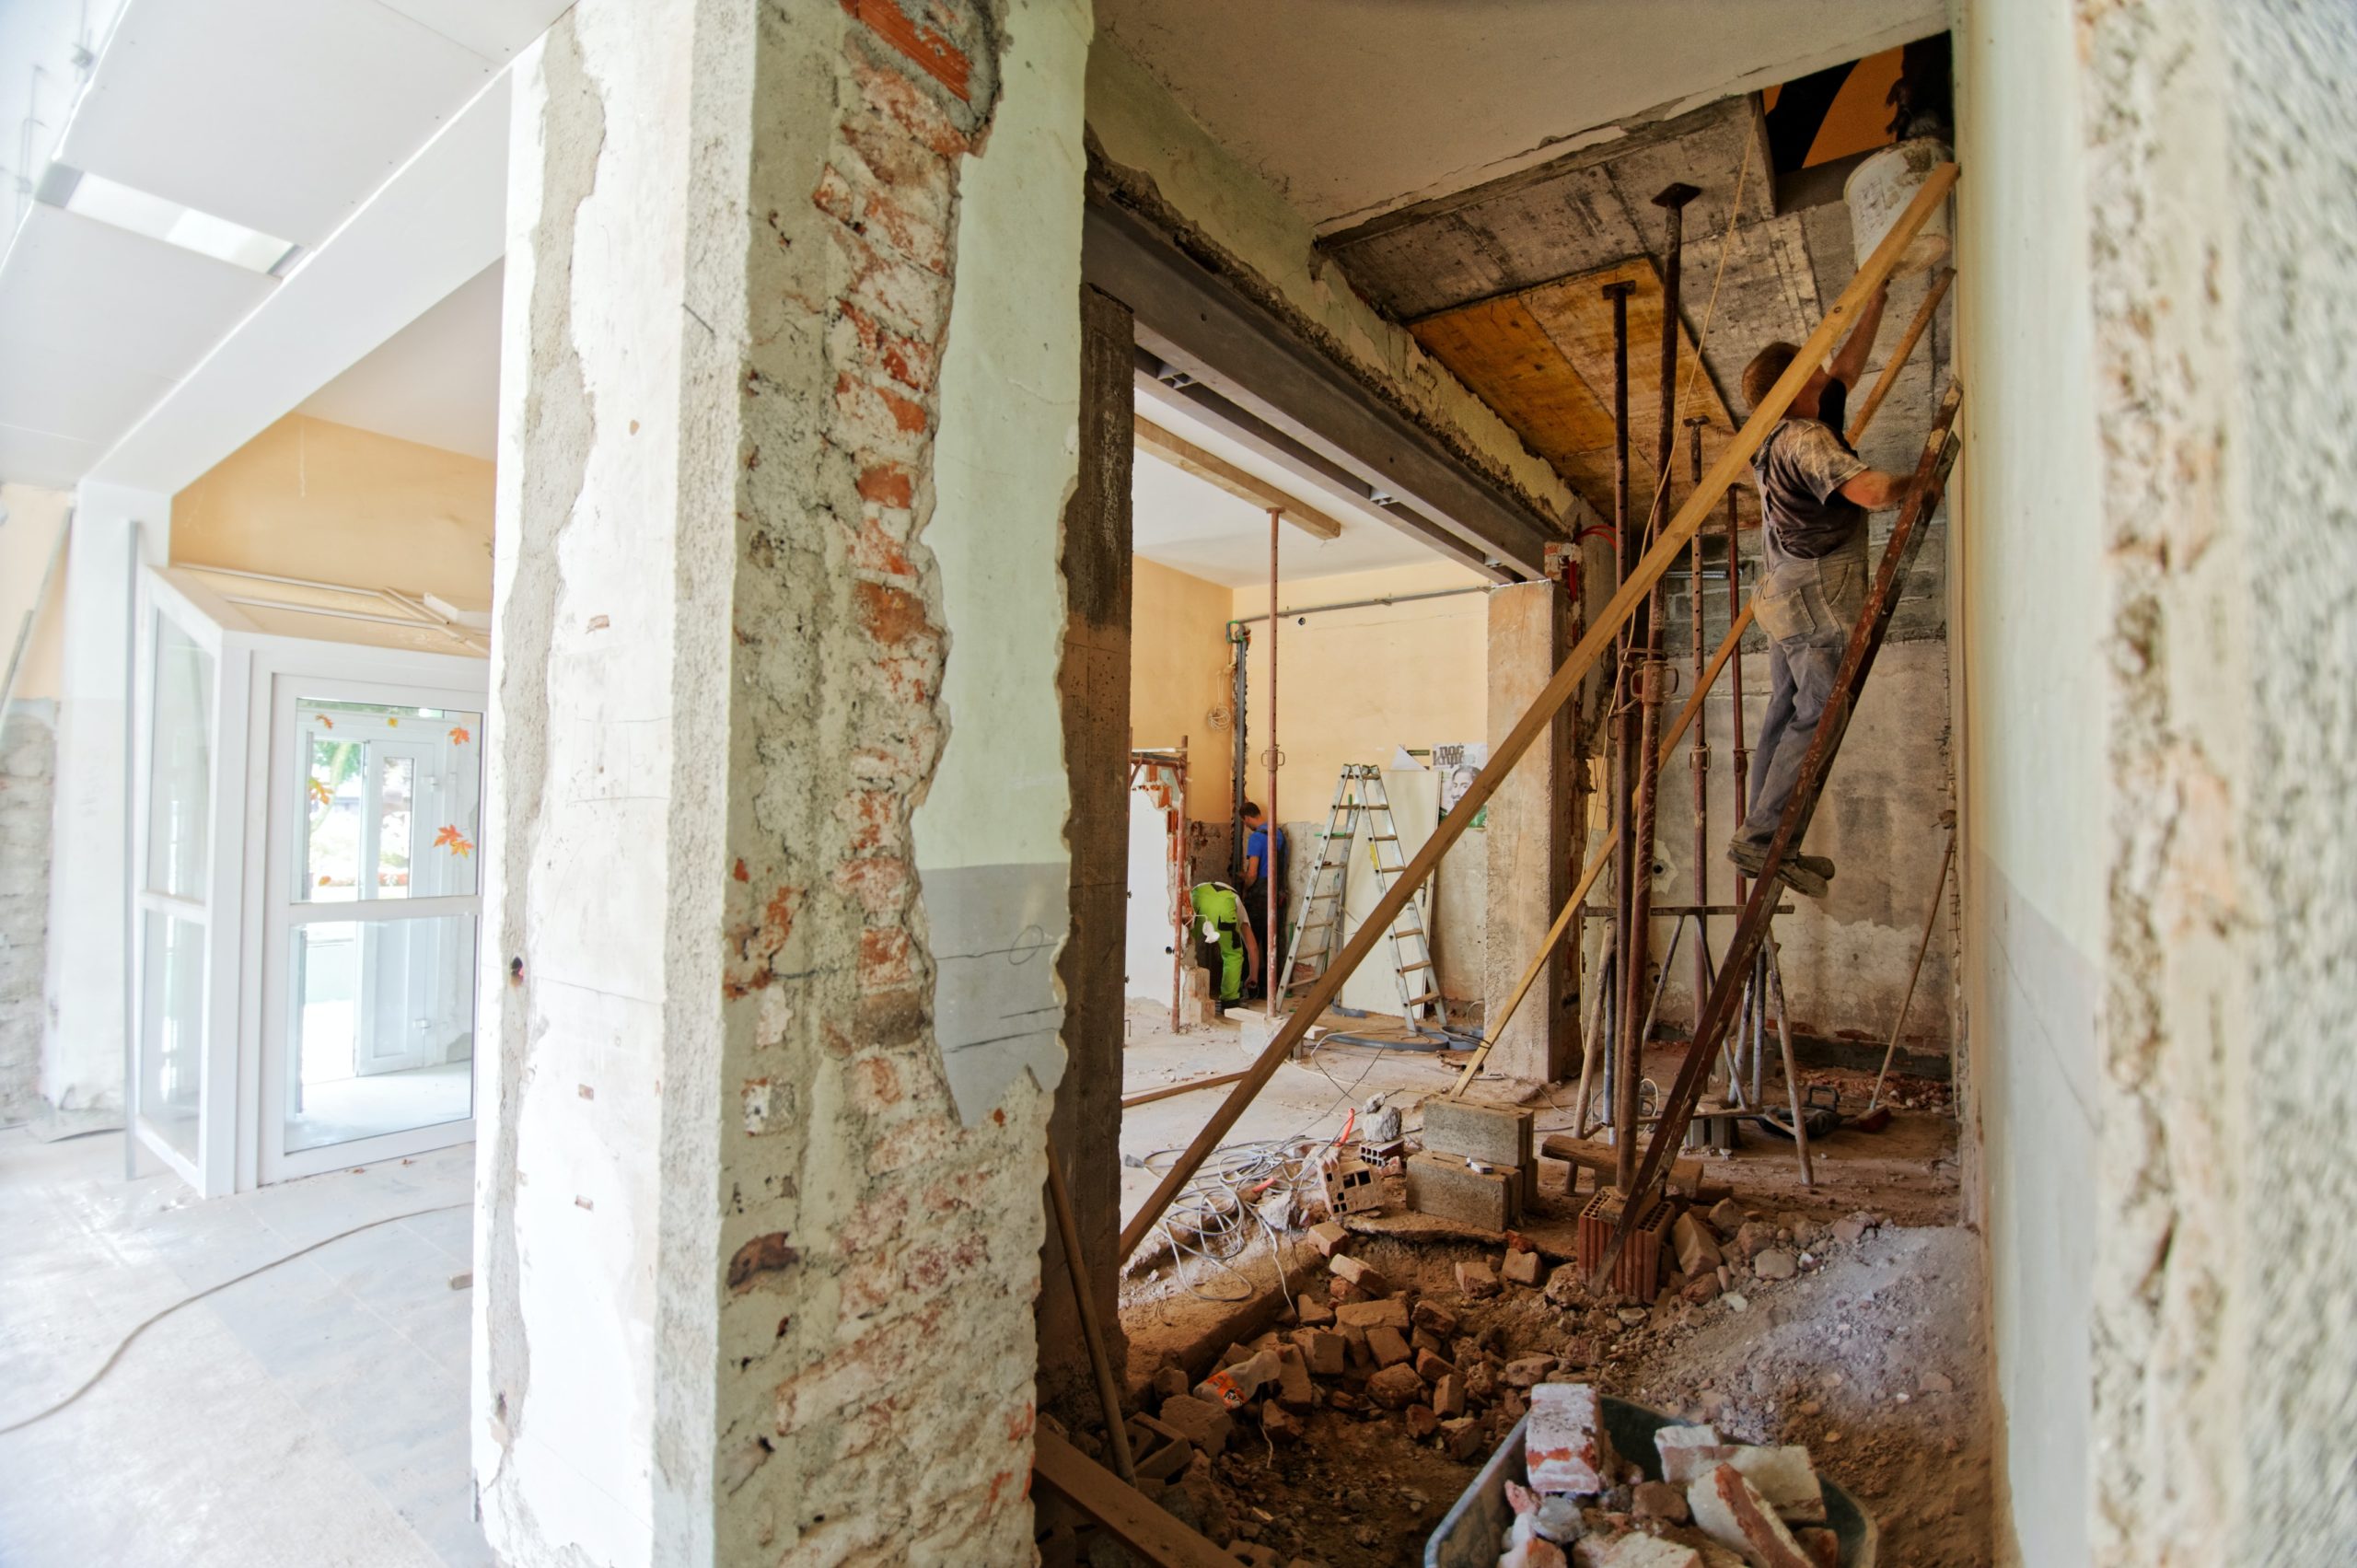 How to Know If You Need a Renovation or a Remodel